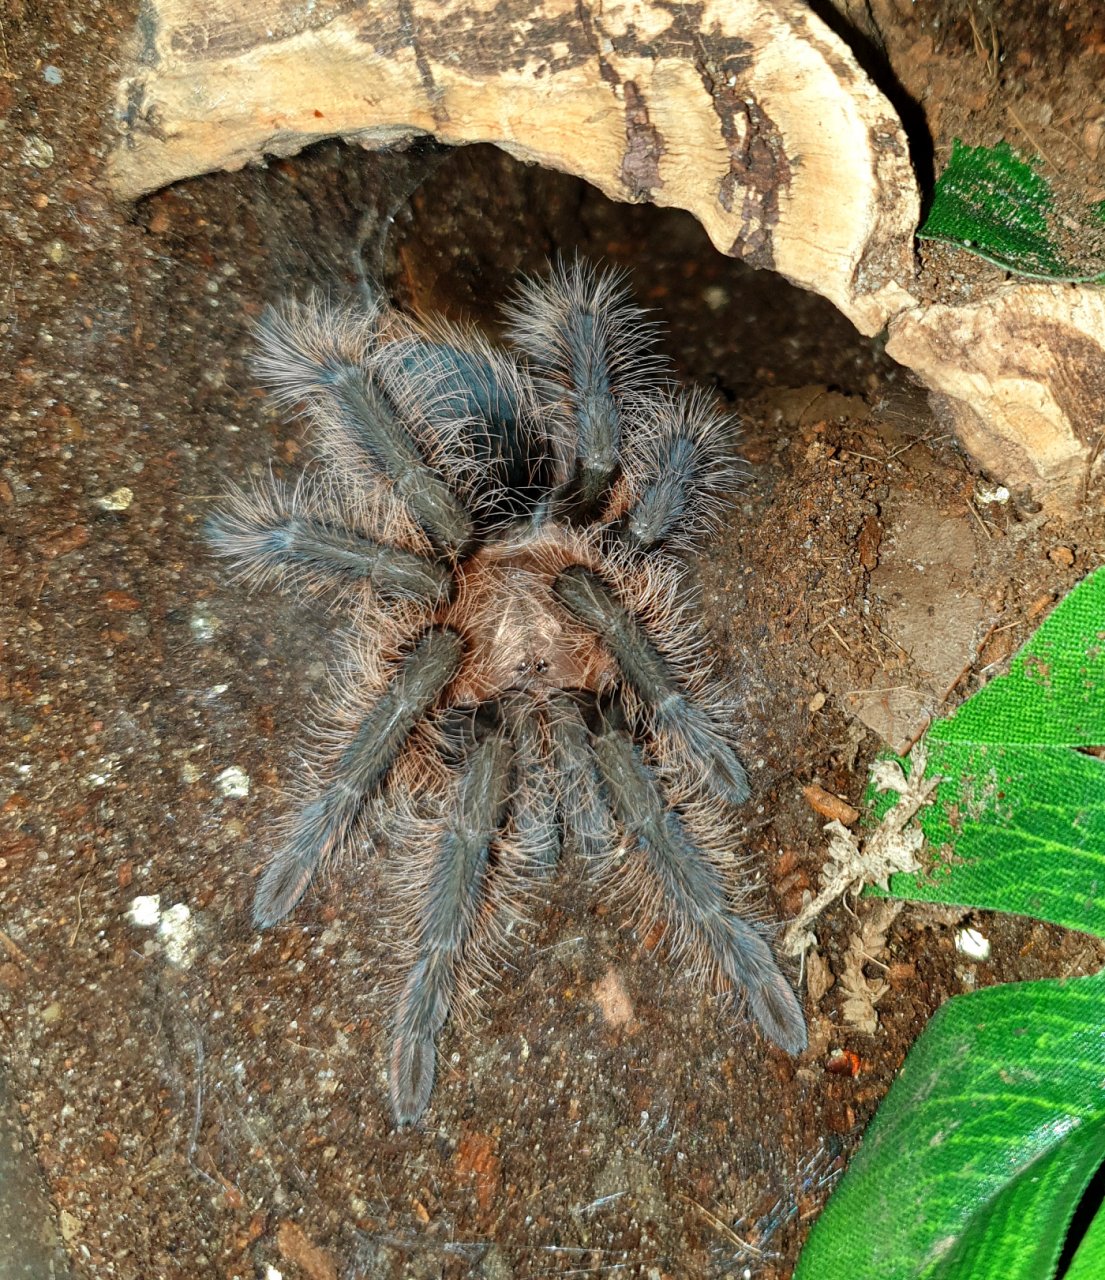 Freshly moulted!